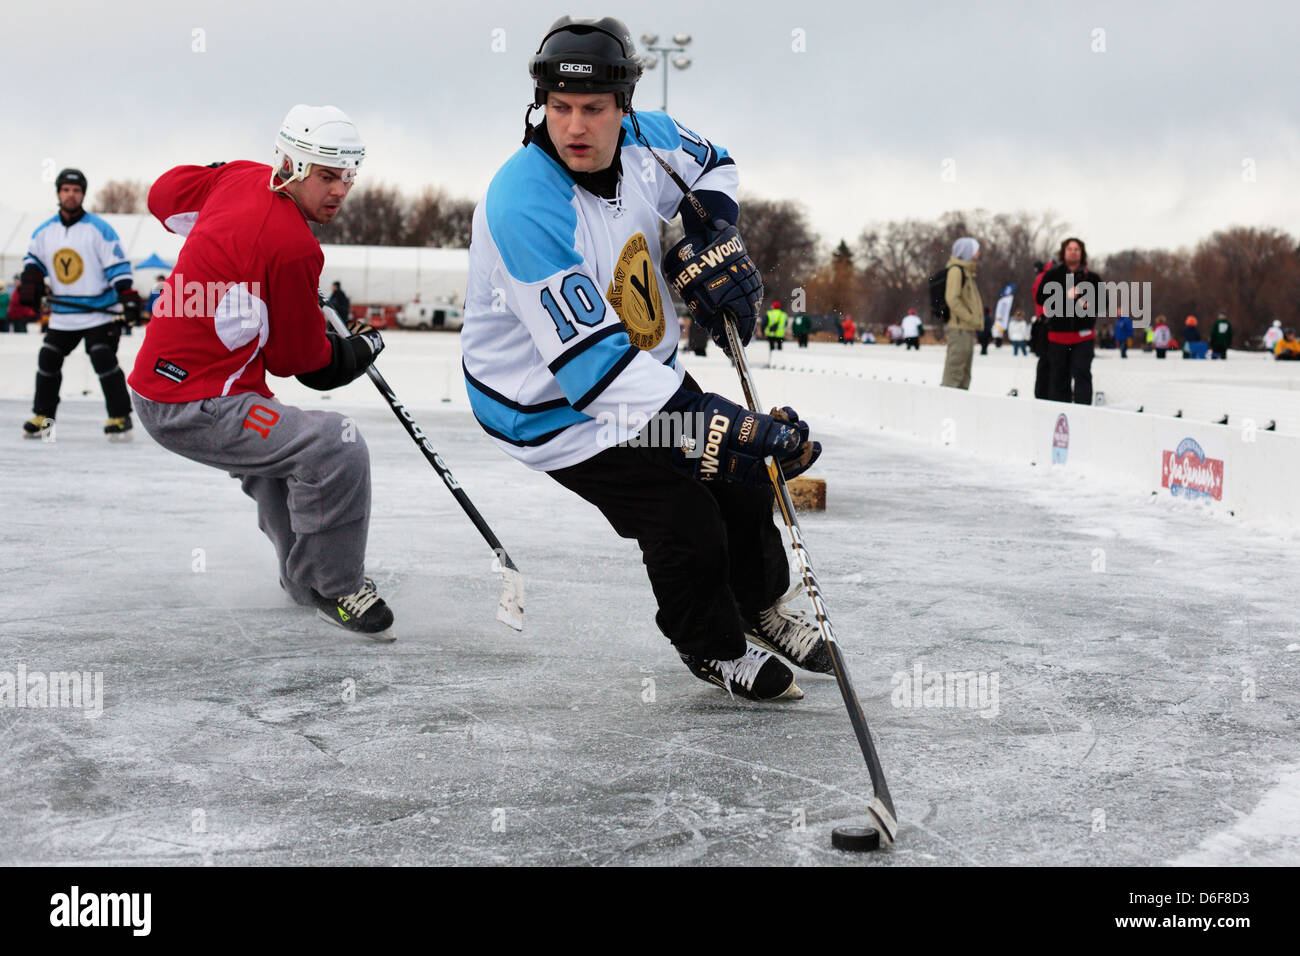 A competitor wheels with the puck during a game at the U.S. Pond Hockey Championships on Lake Nokomis on January 19, 2013. Stock Photo